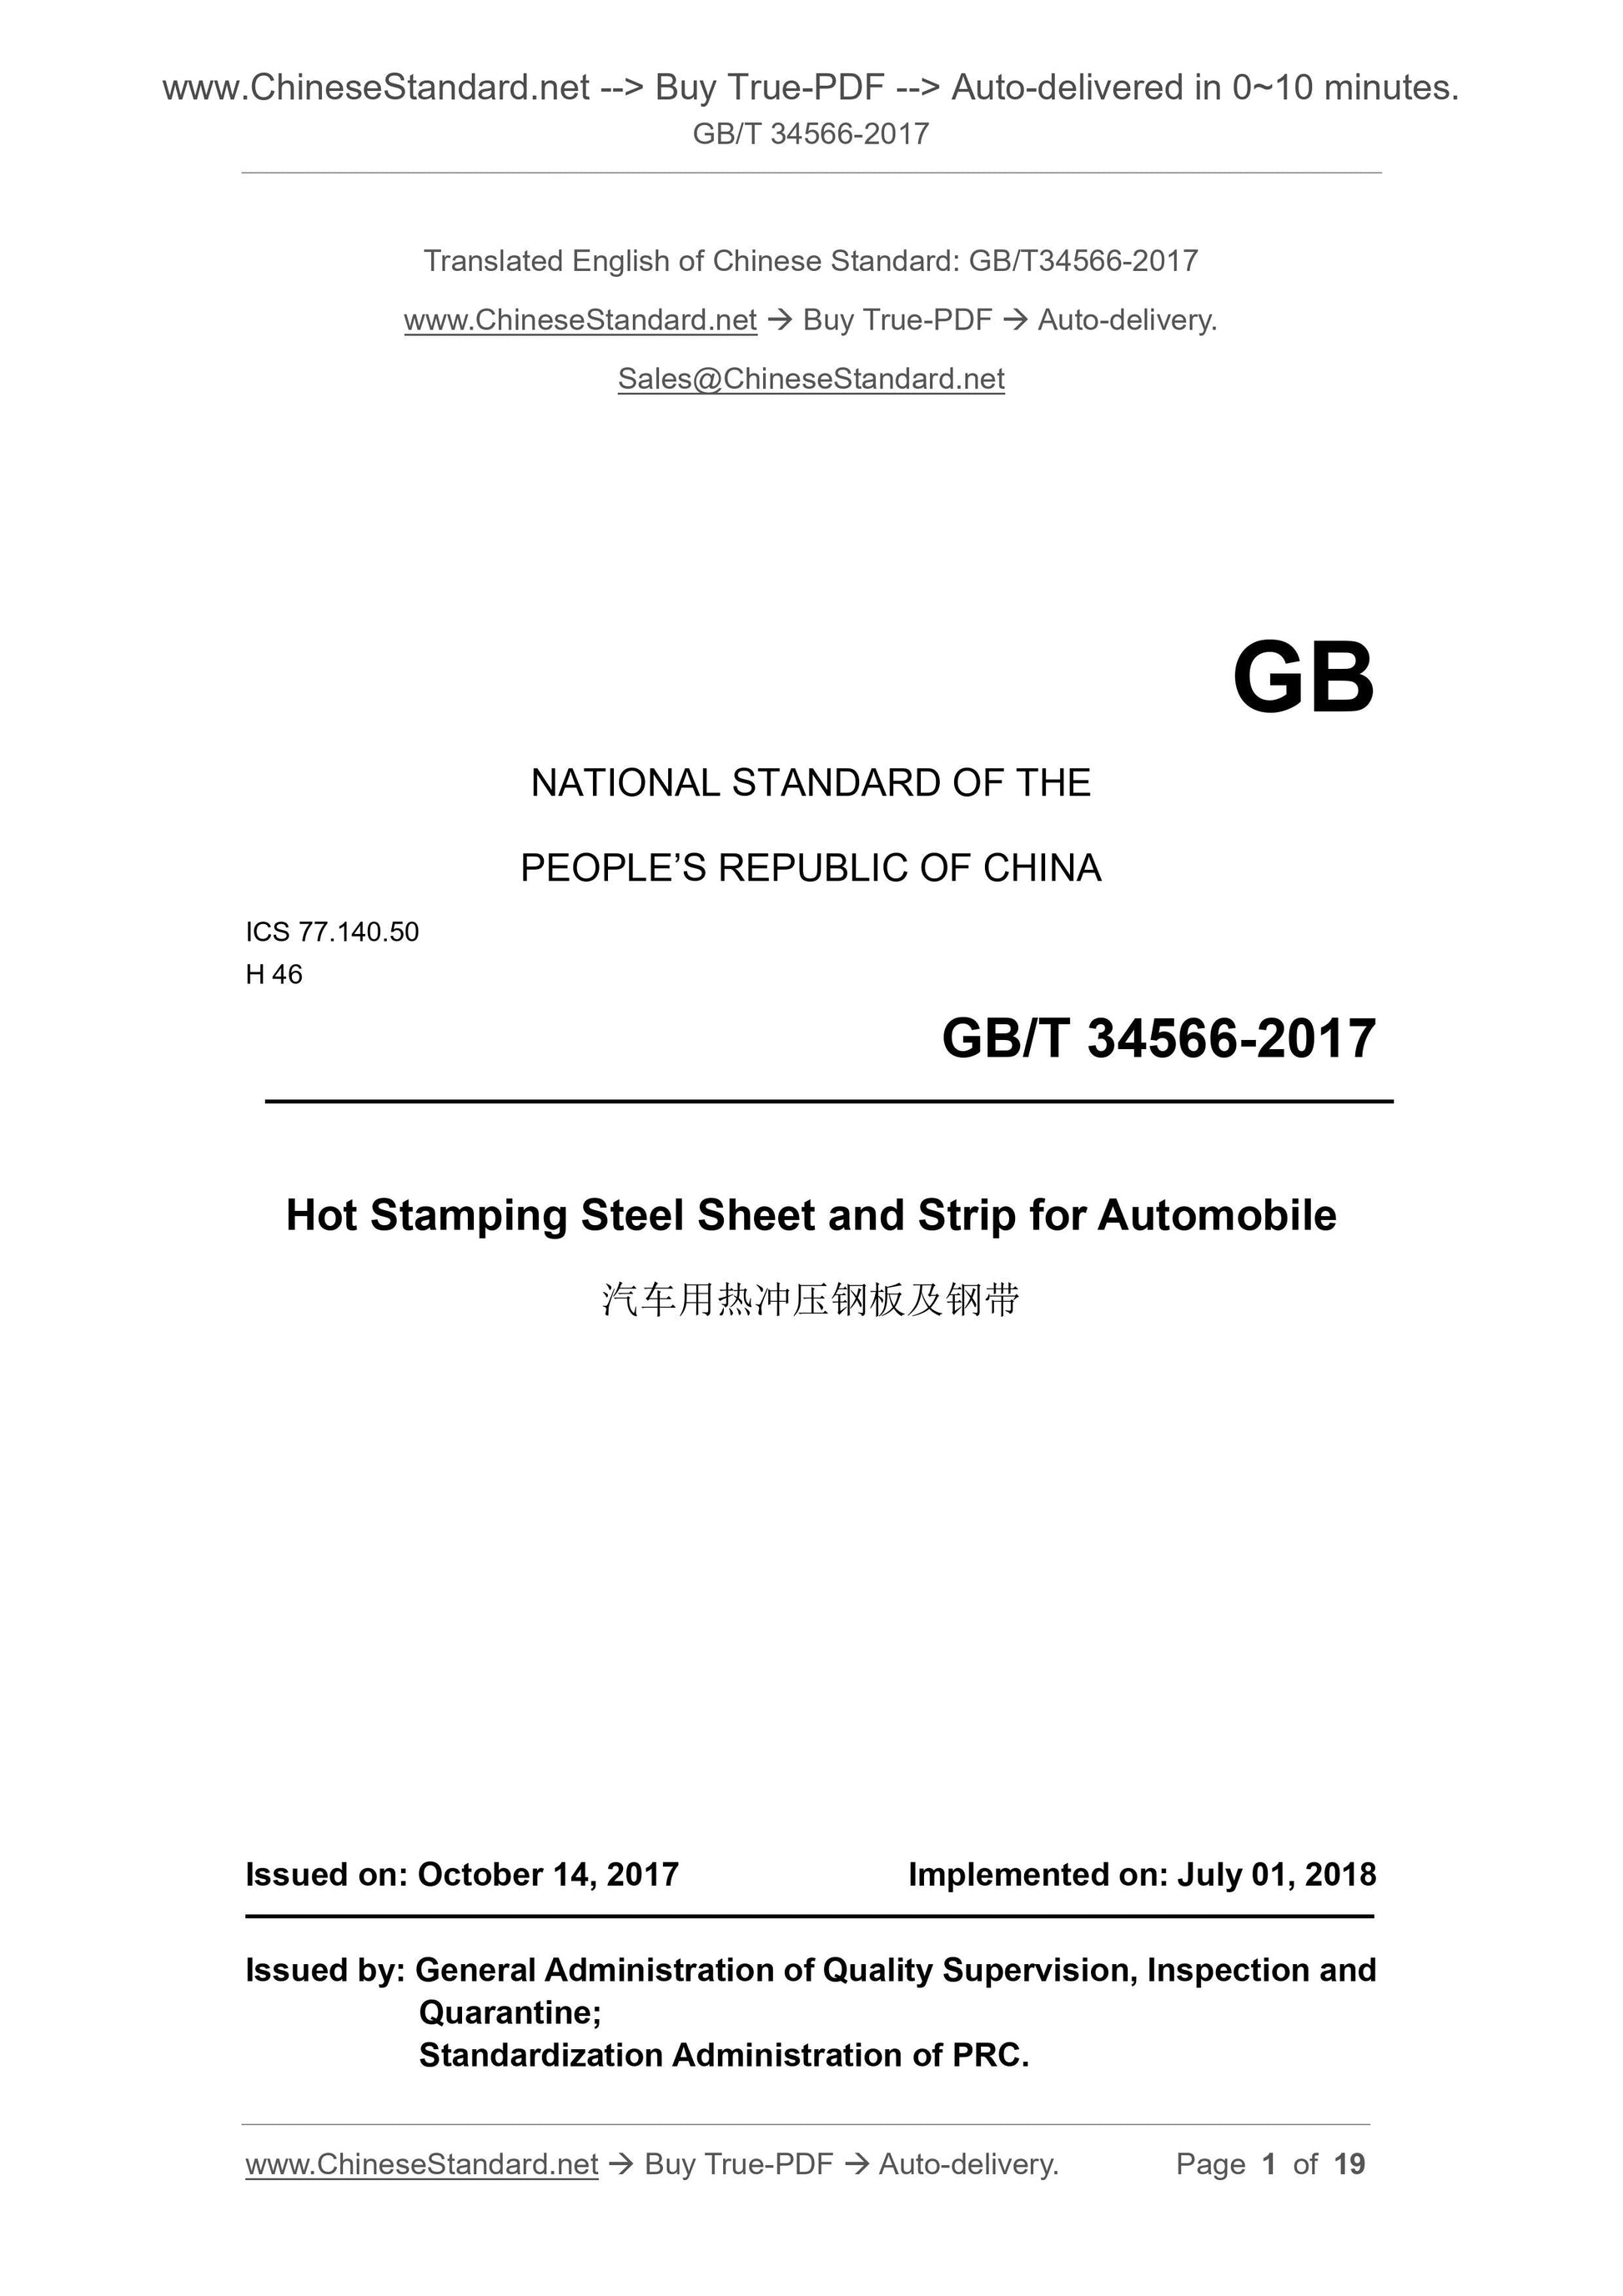 GB/T 34566-2017 Page 1